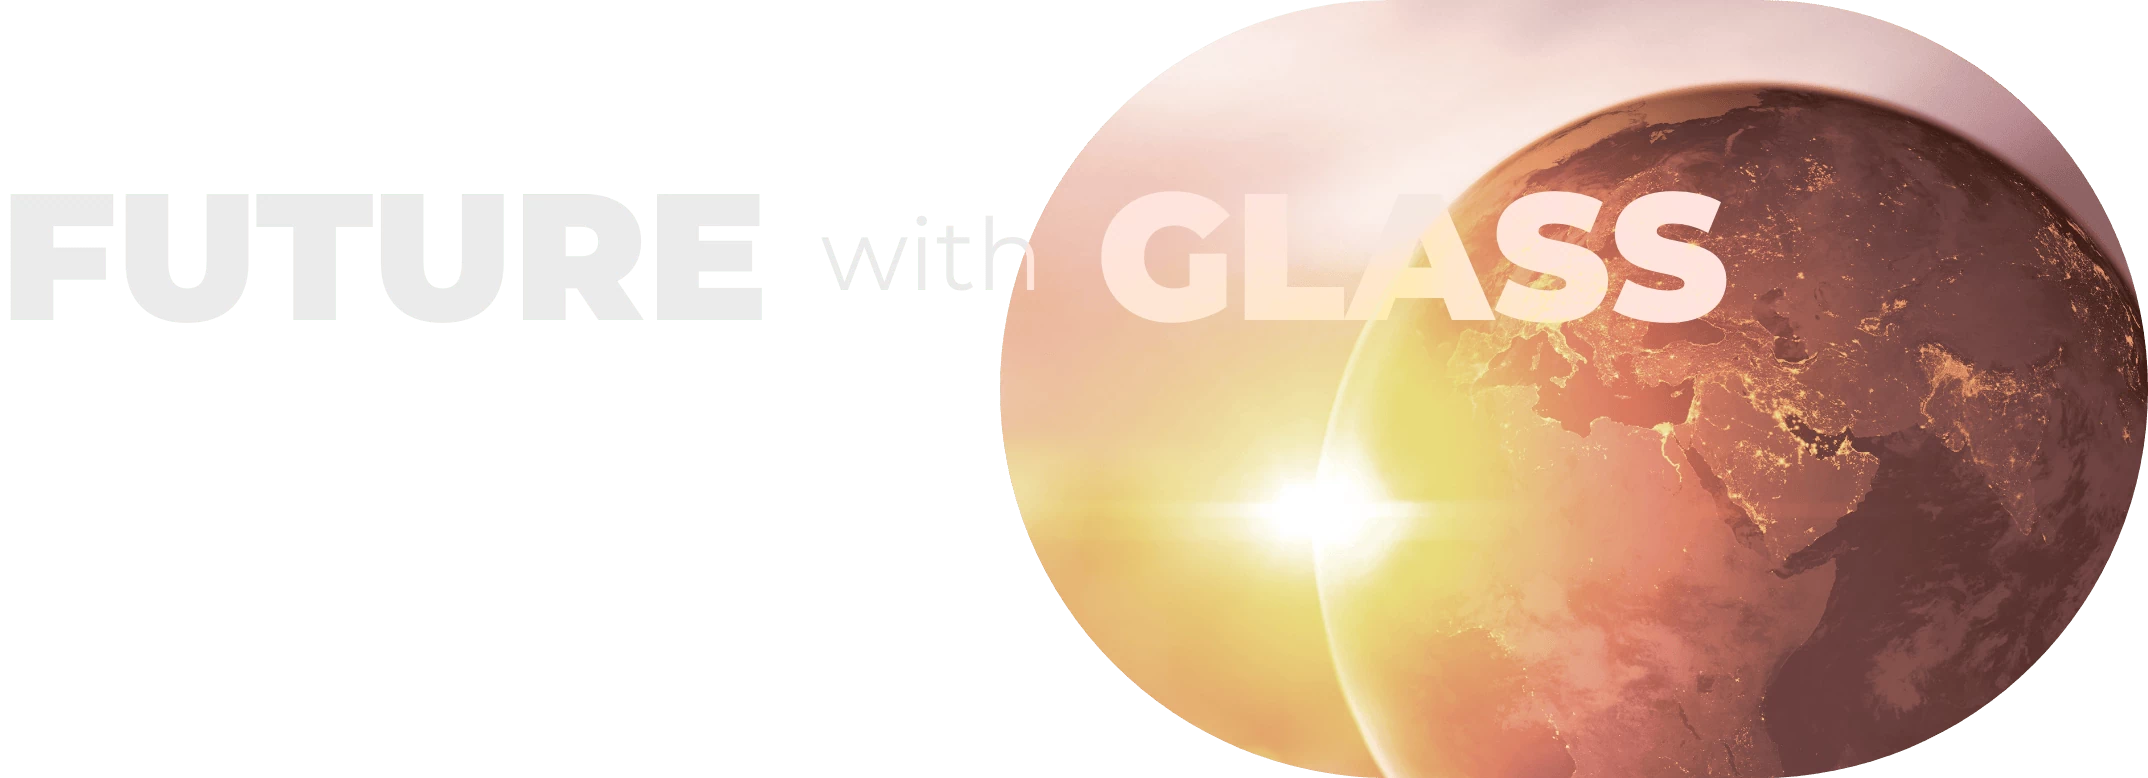 future with glass